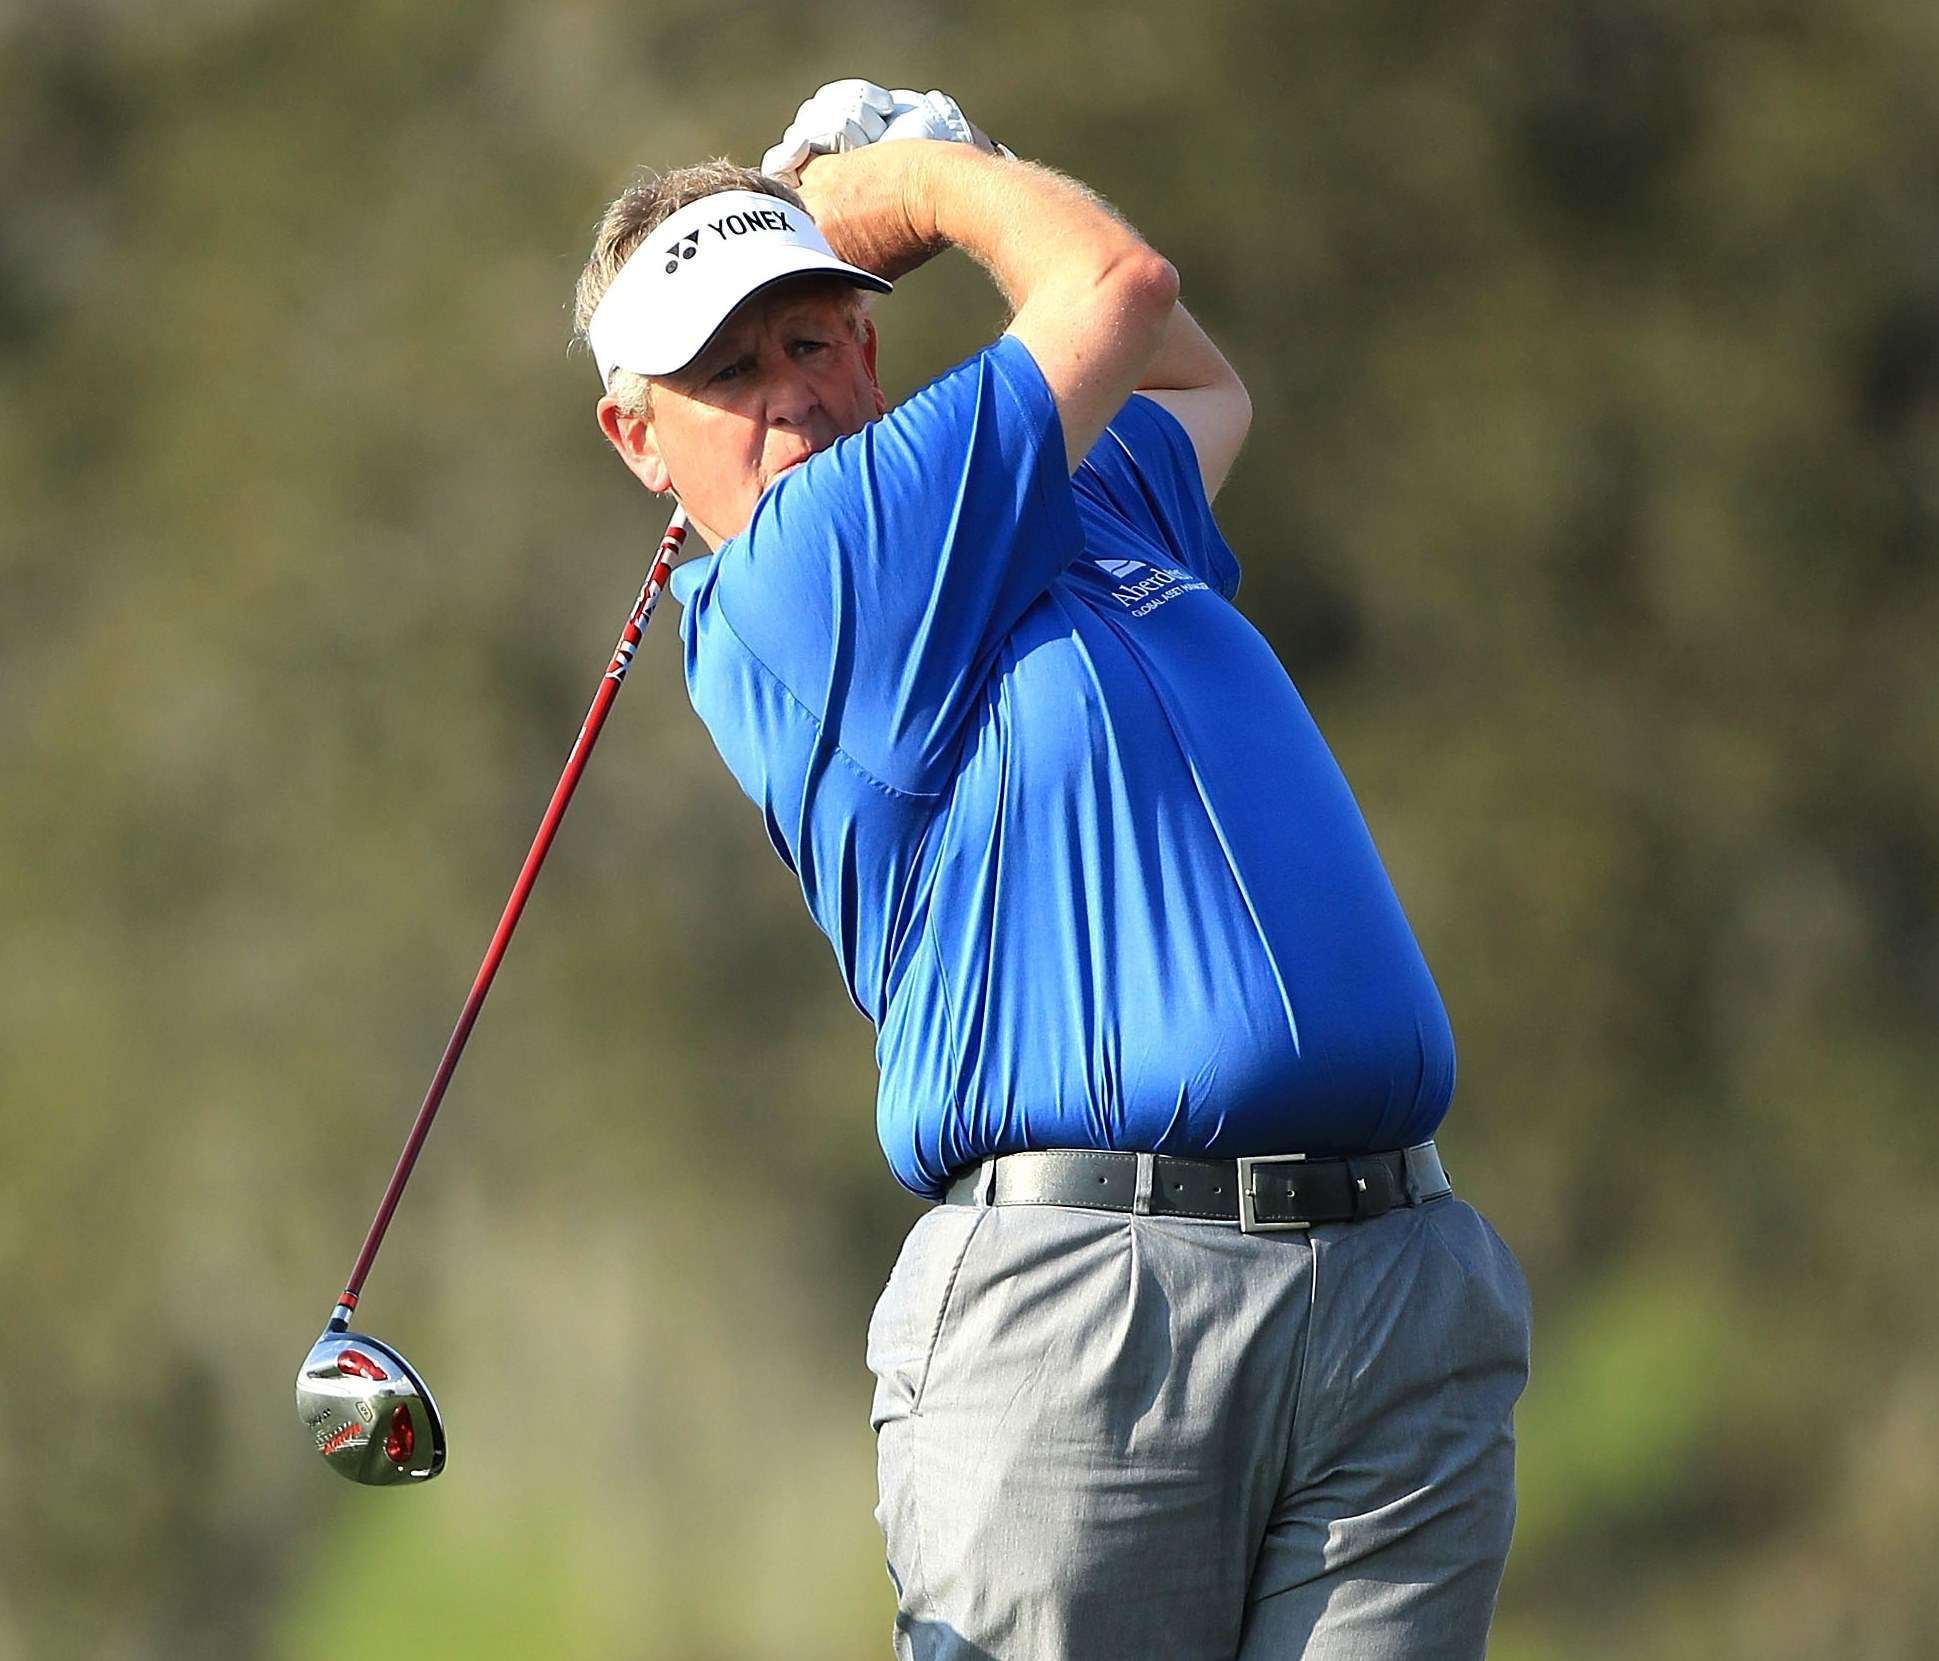 Colin Montgomerie was inducted three years ago, and rightly so, but where is Ian Woosnam's recognition writes John Huggan (photo by Getty Images)